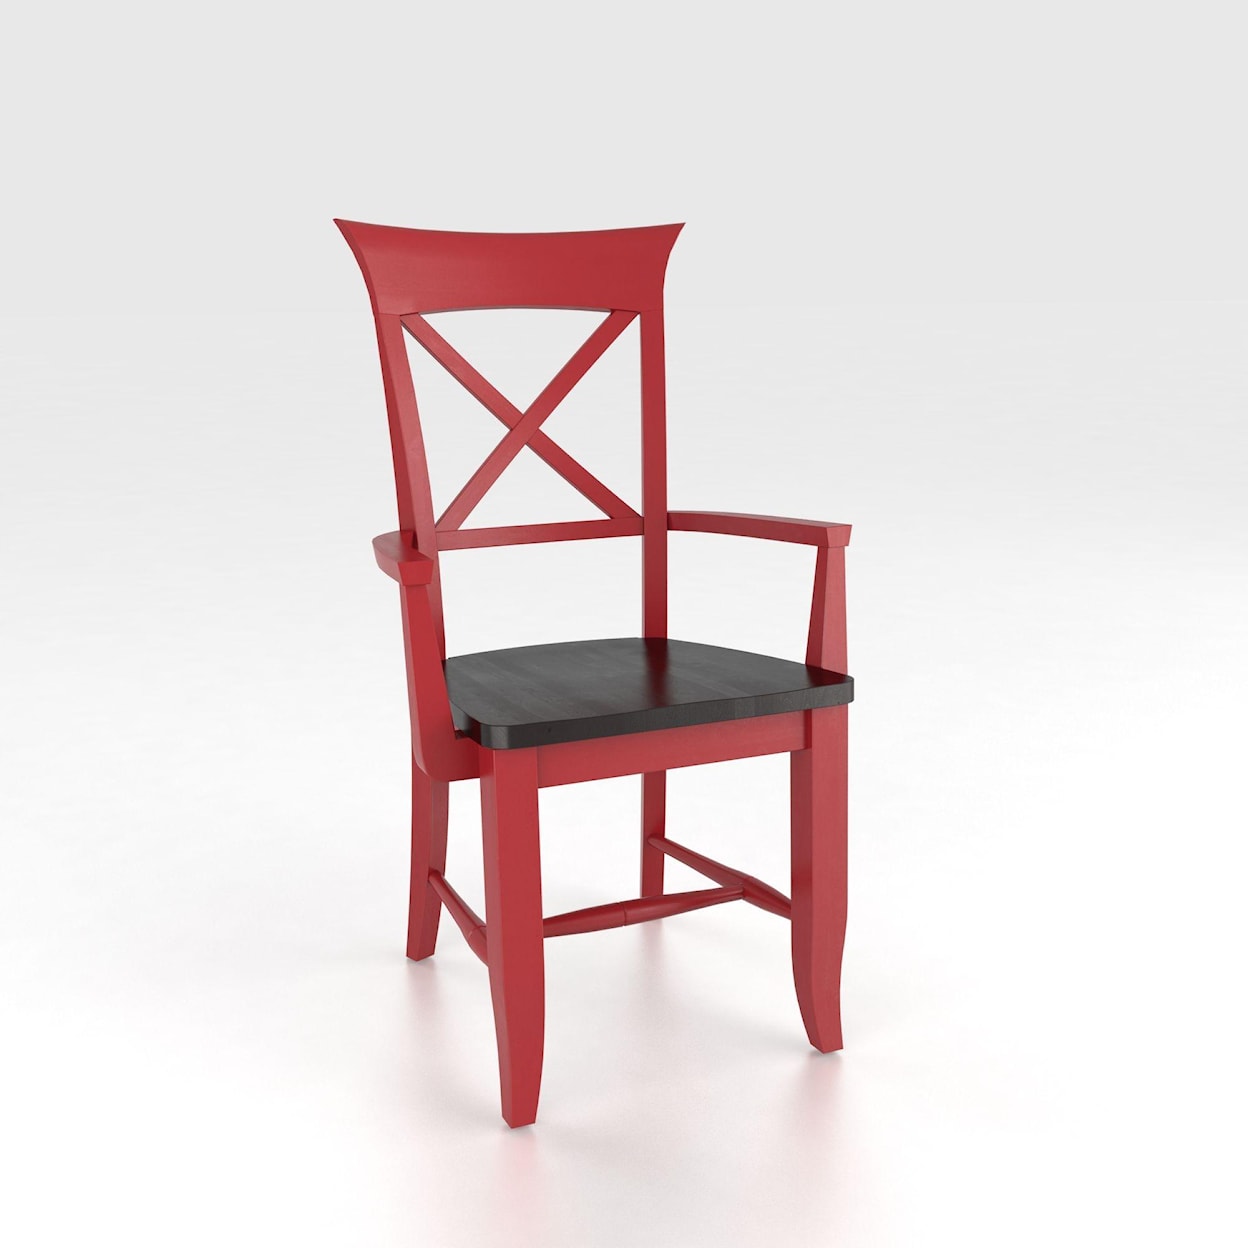 Canadel Canadel Customizable Arm Chair - Wood Seat